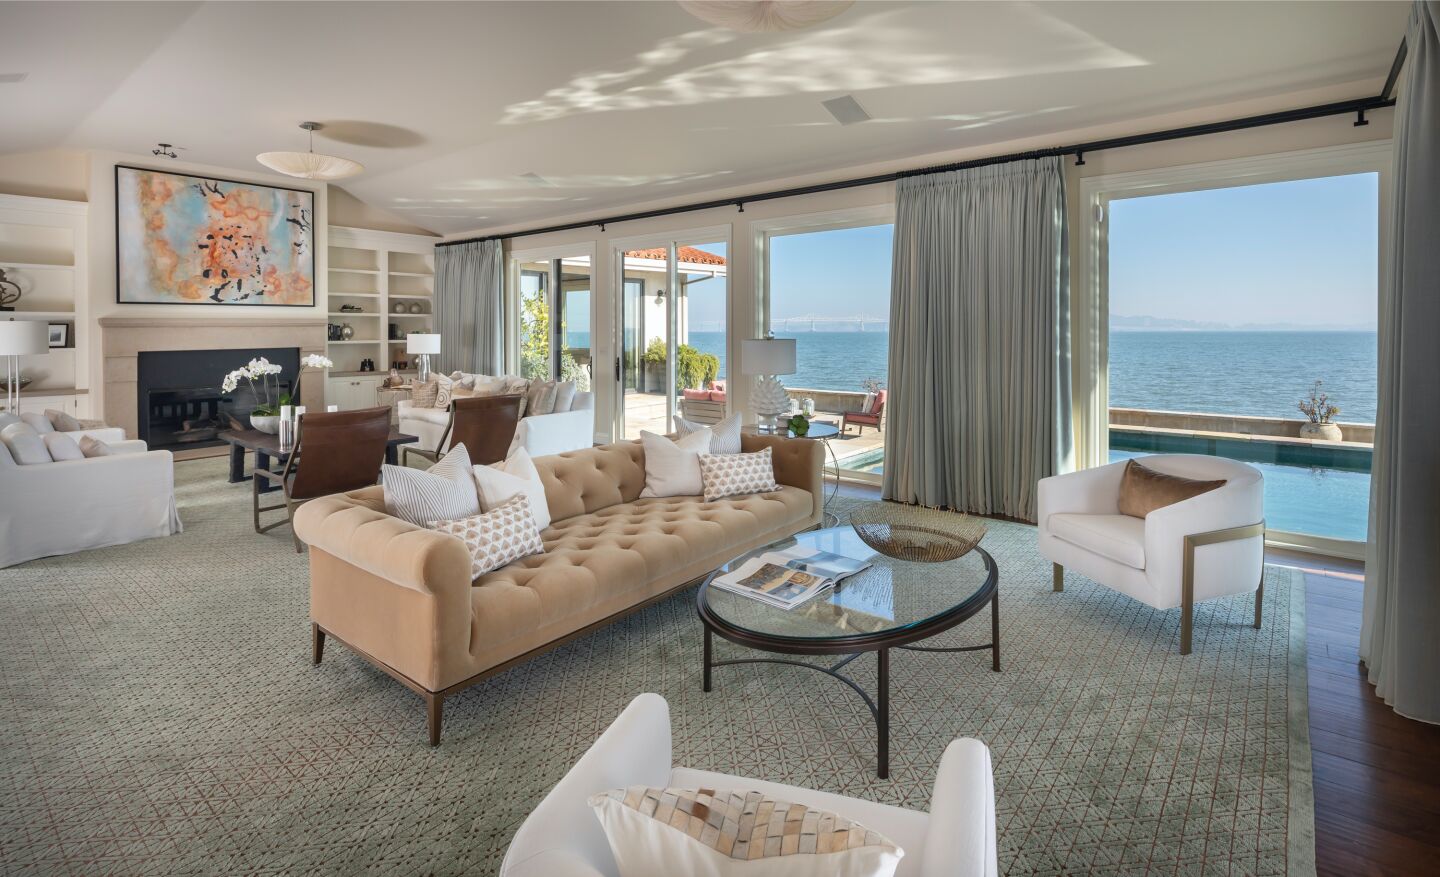 The great room with furniture and windows overlooking the bay.